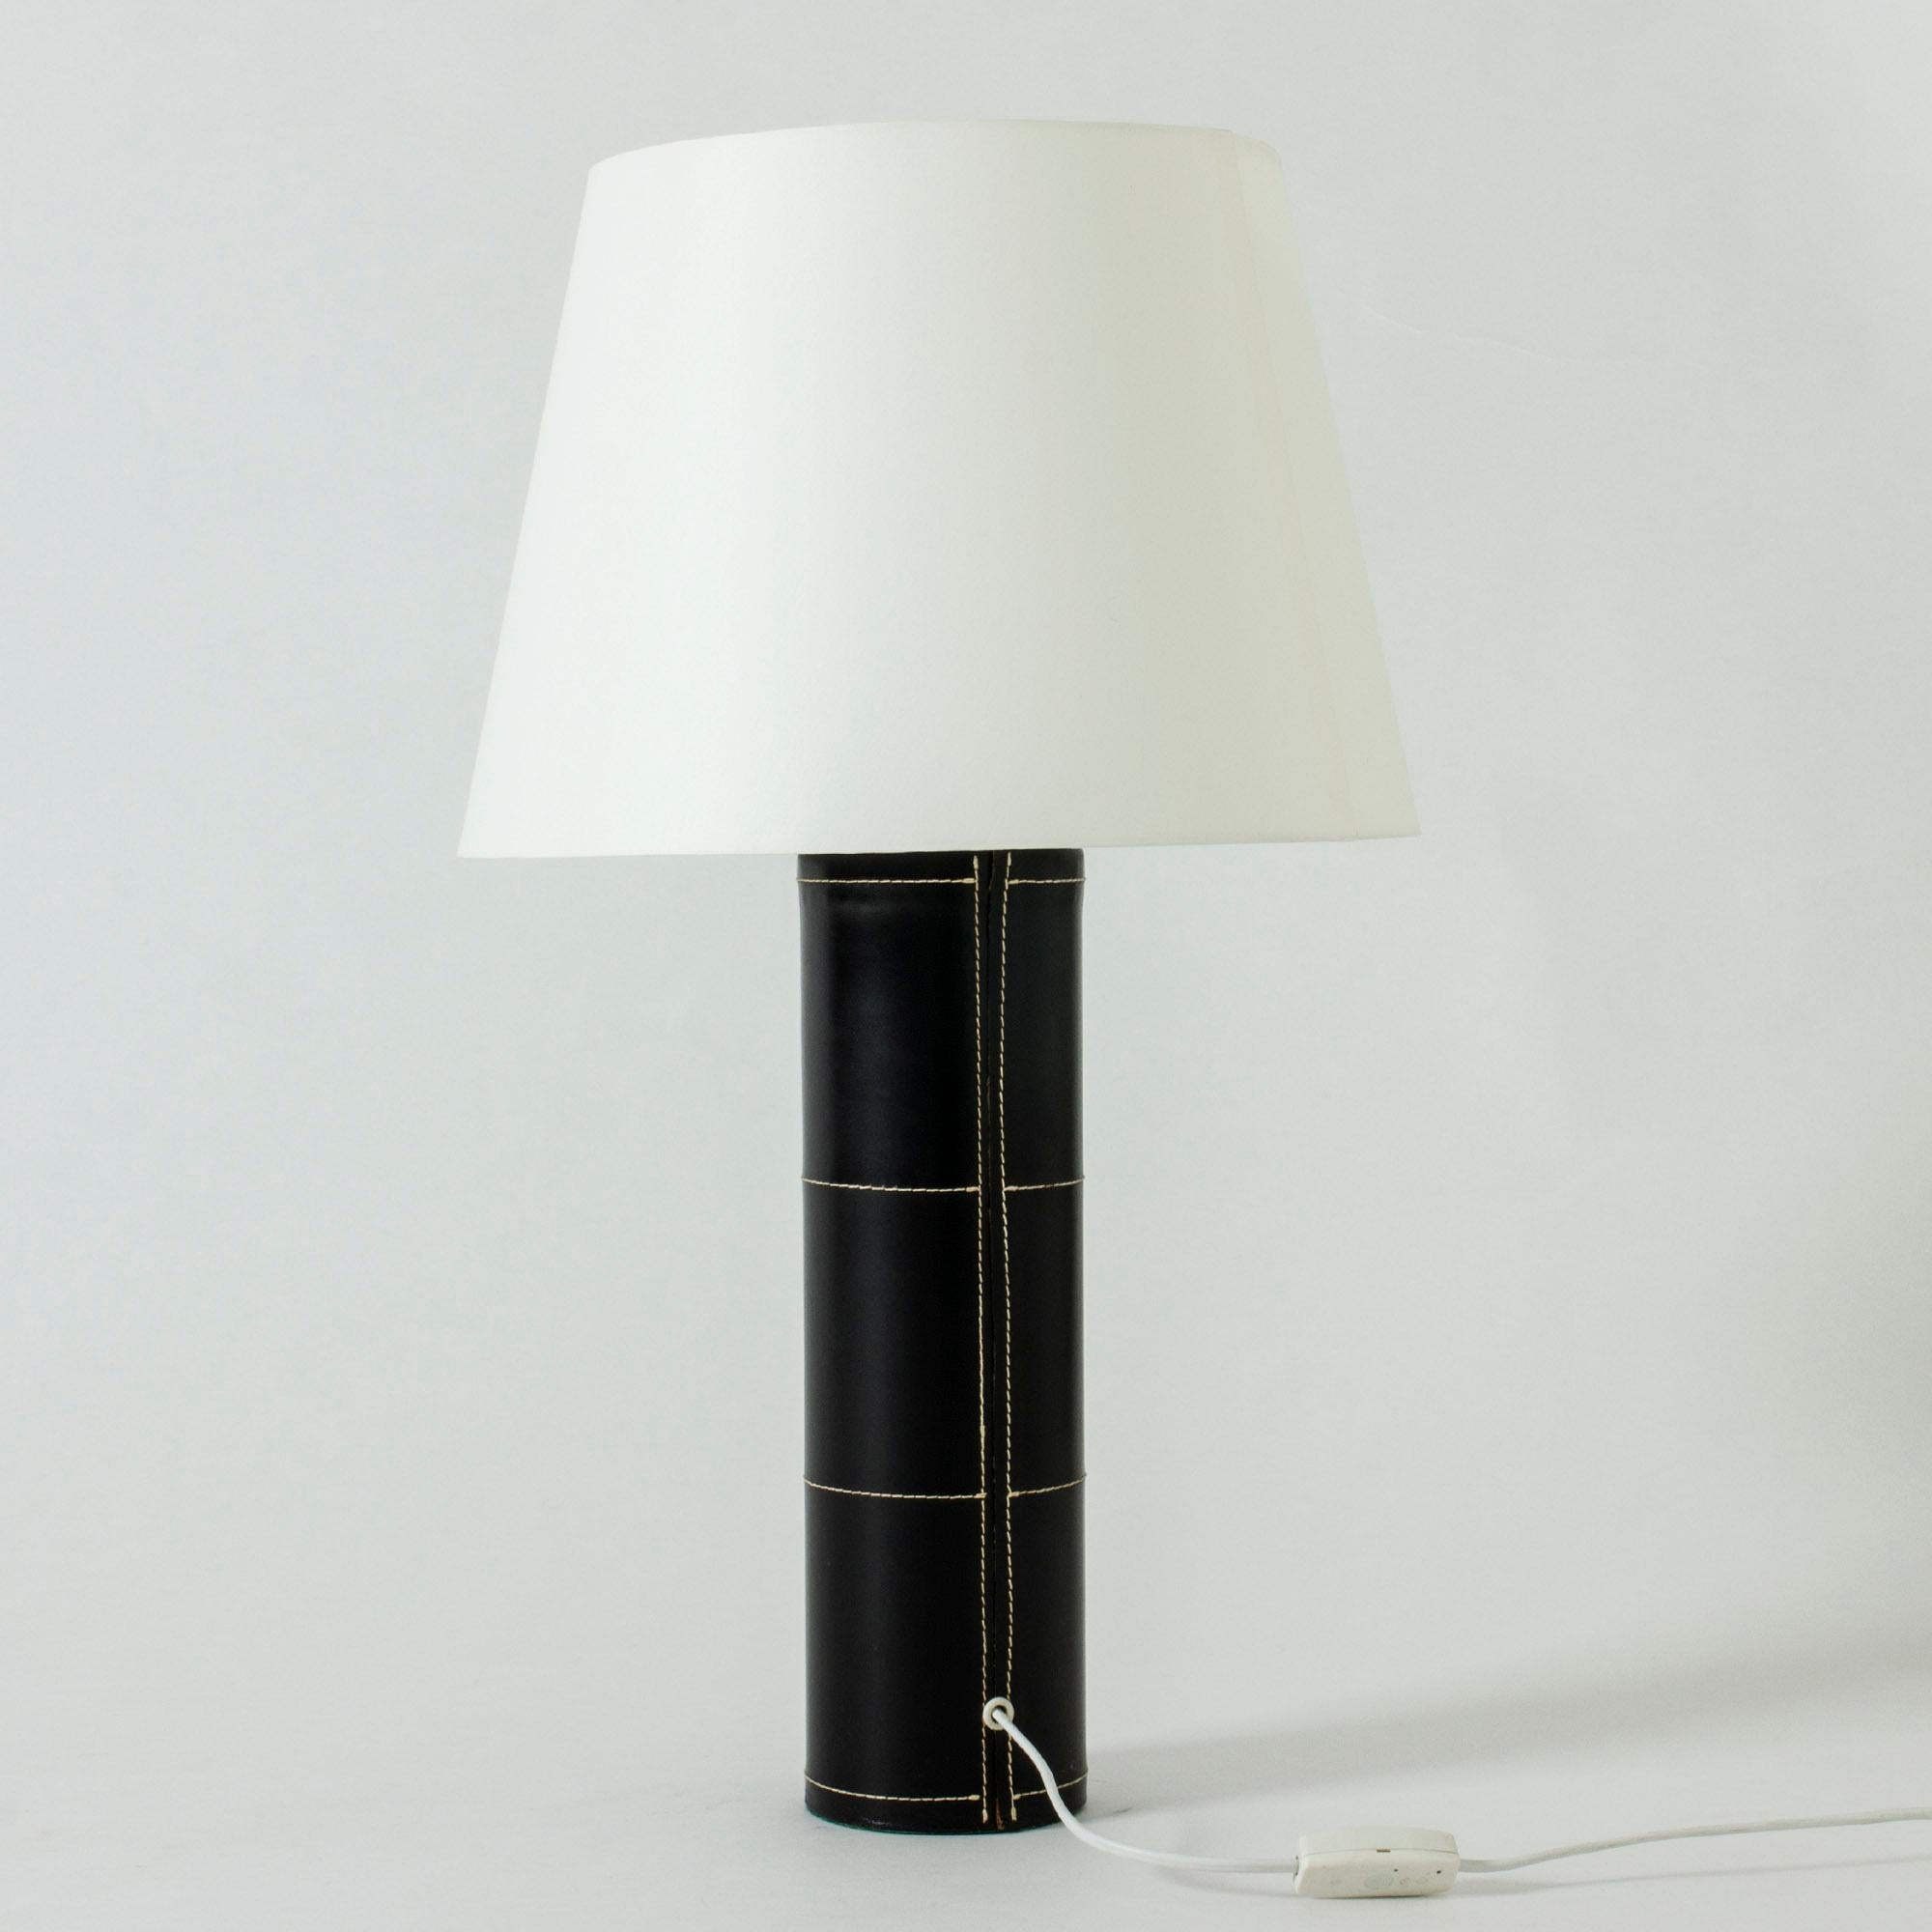 Large table lamp from Bergboms with a cylinder base dressed in black leather. Decorated with white seams – a Minimalist design with a deluxe finish.